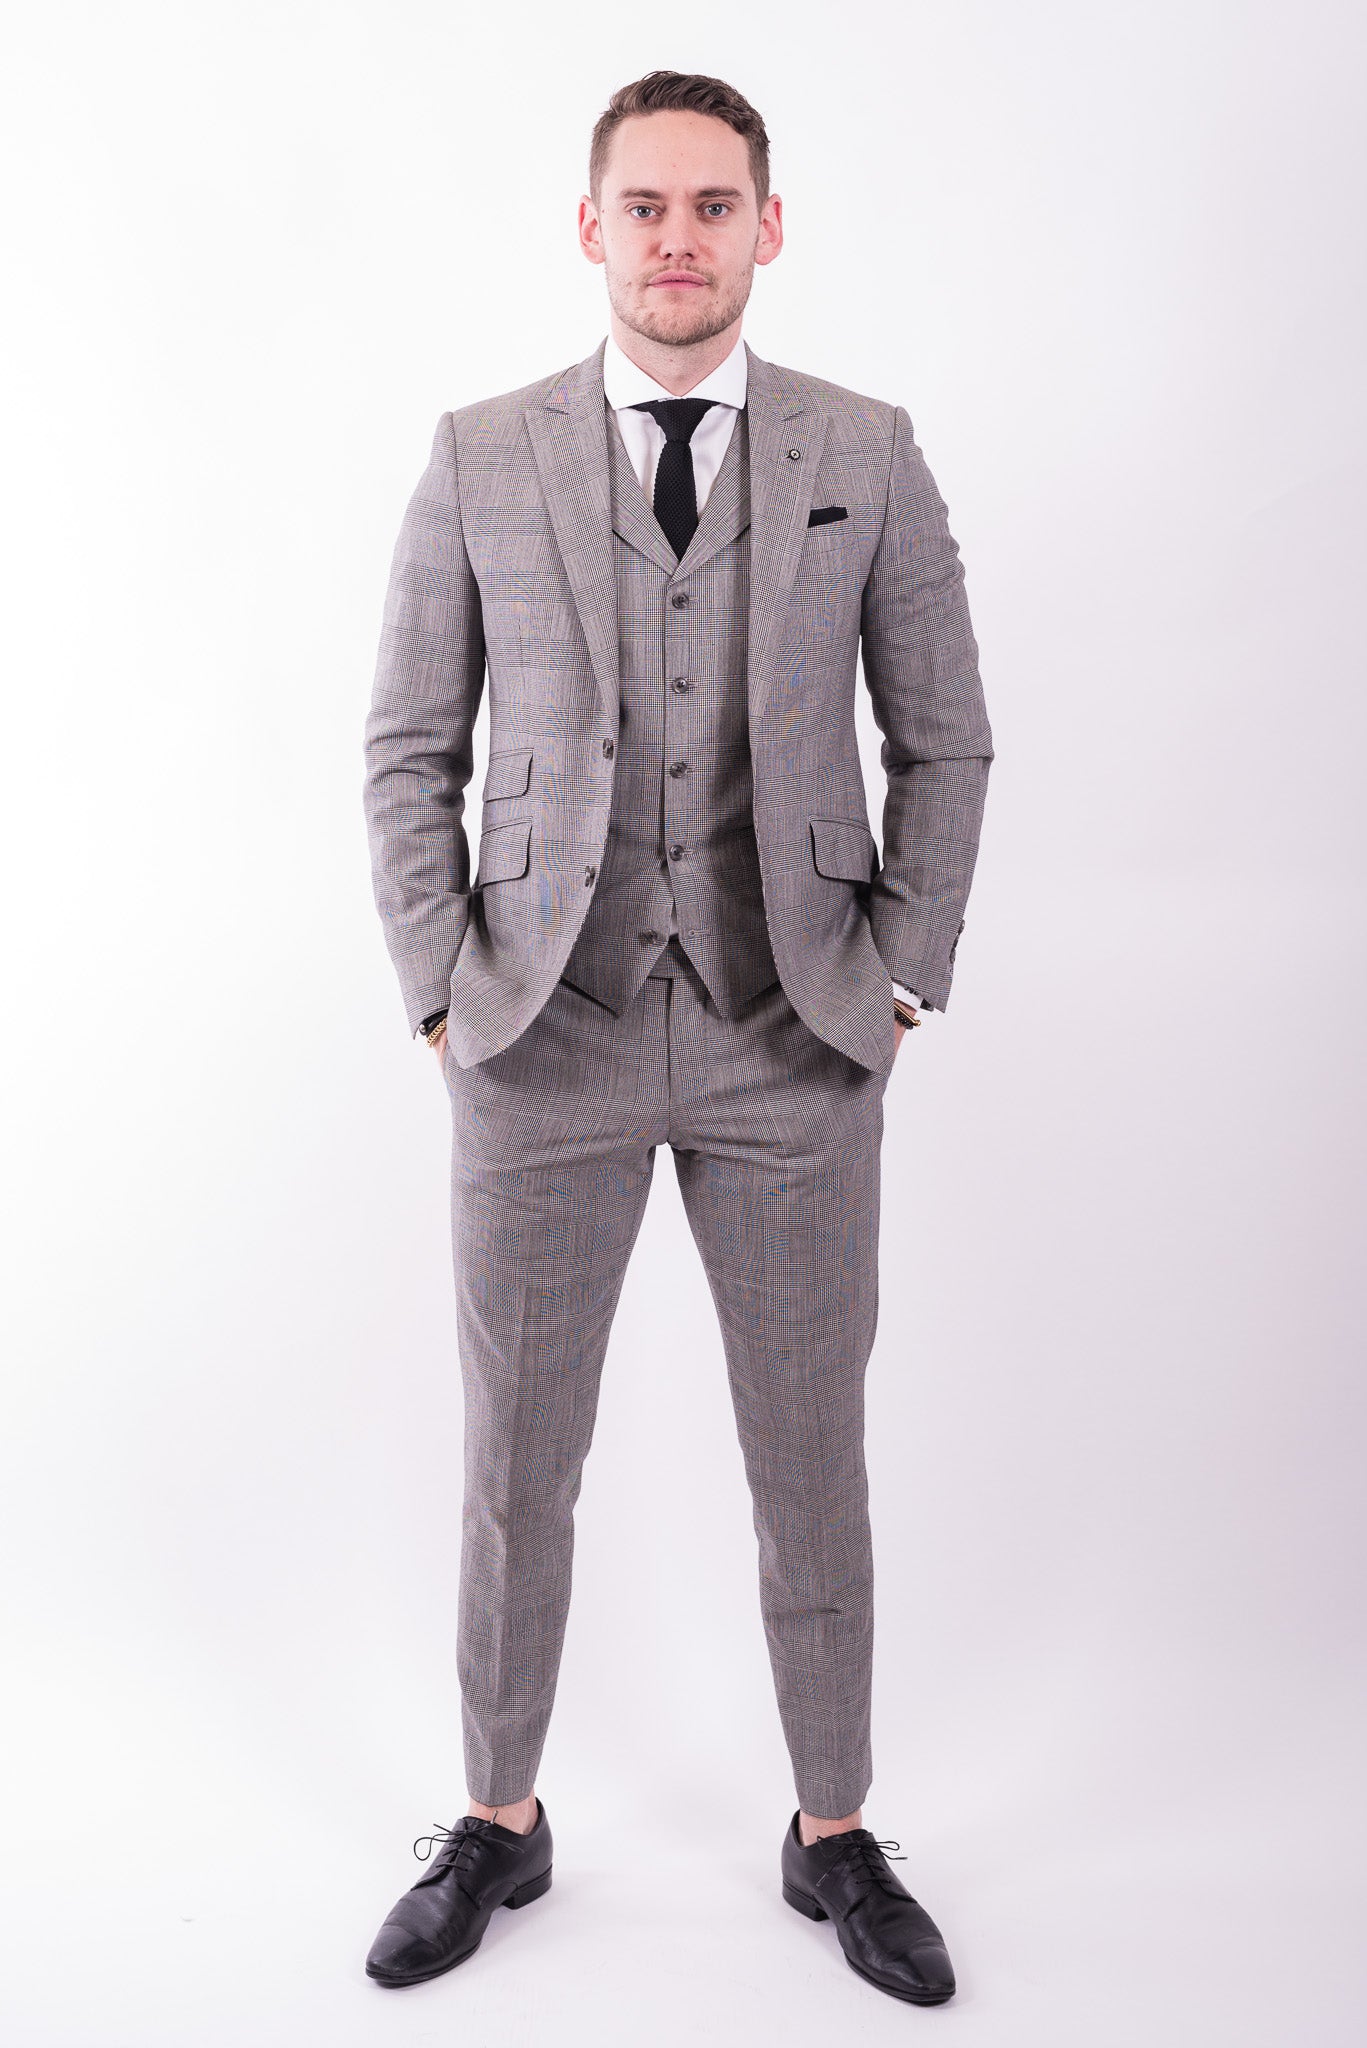 custom three piece grey flannel suit from Ticknors